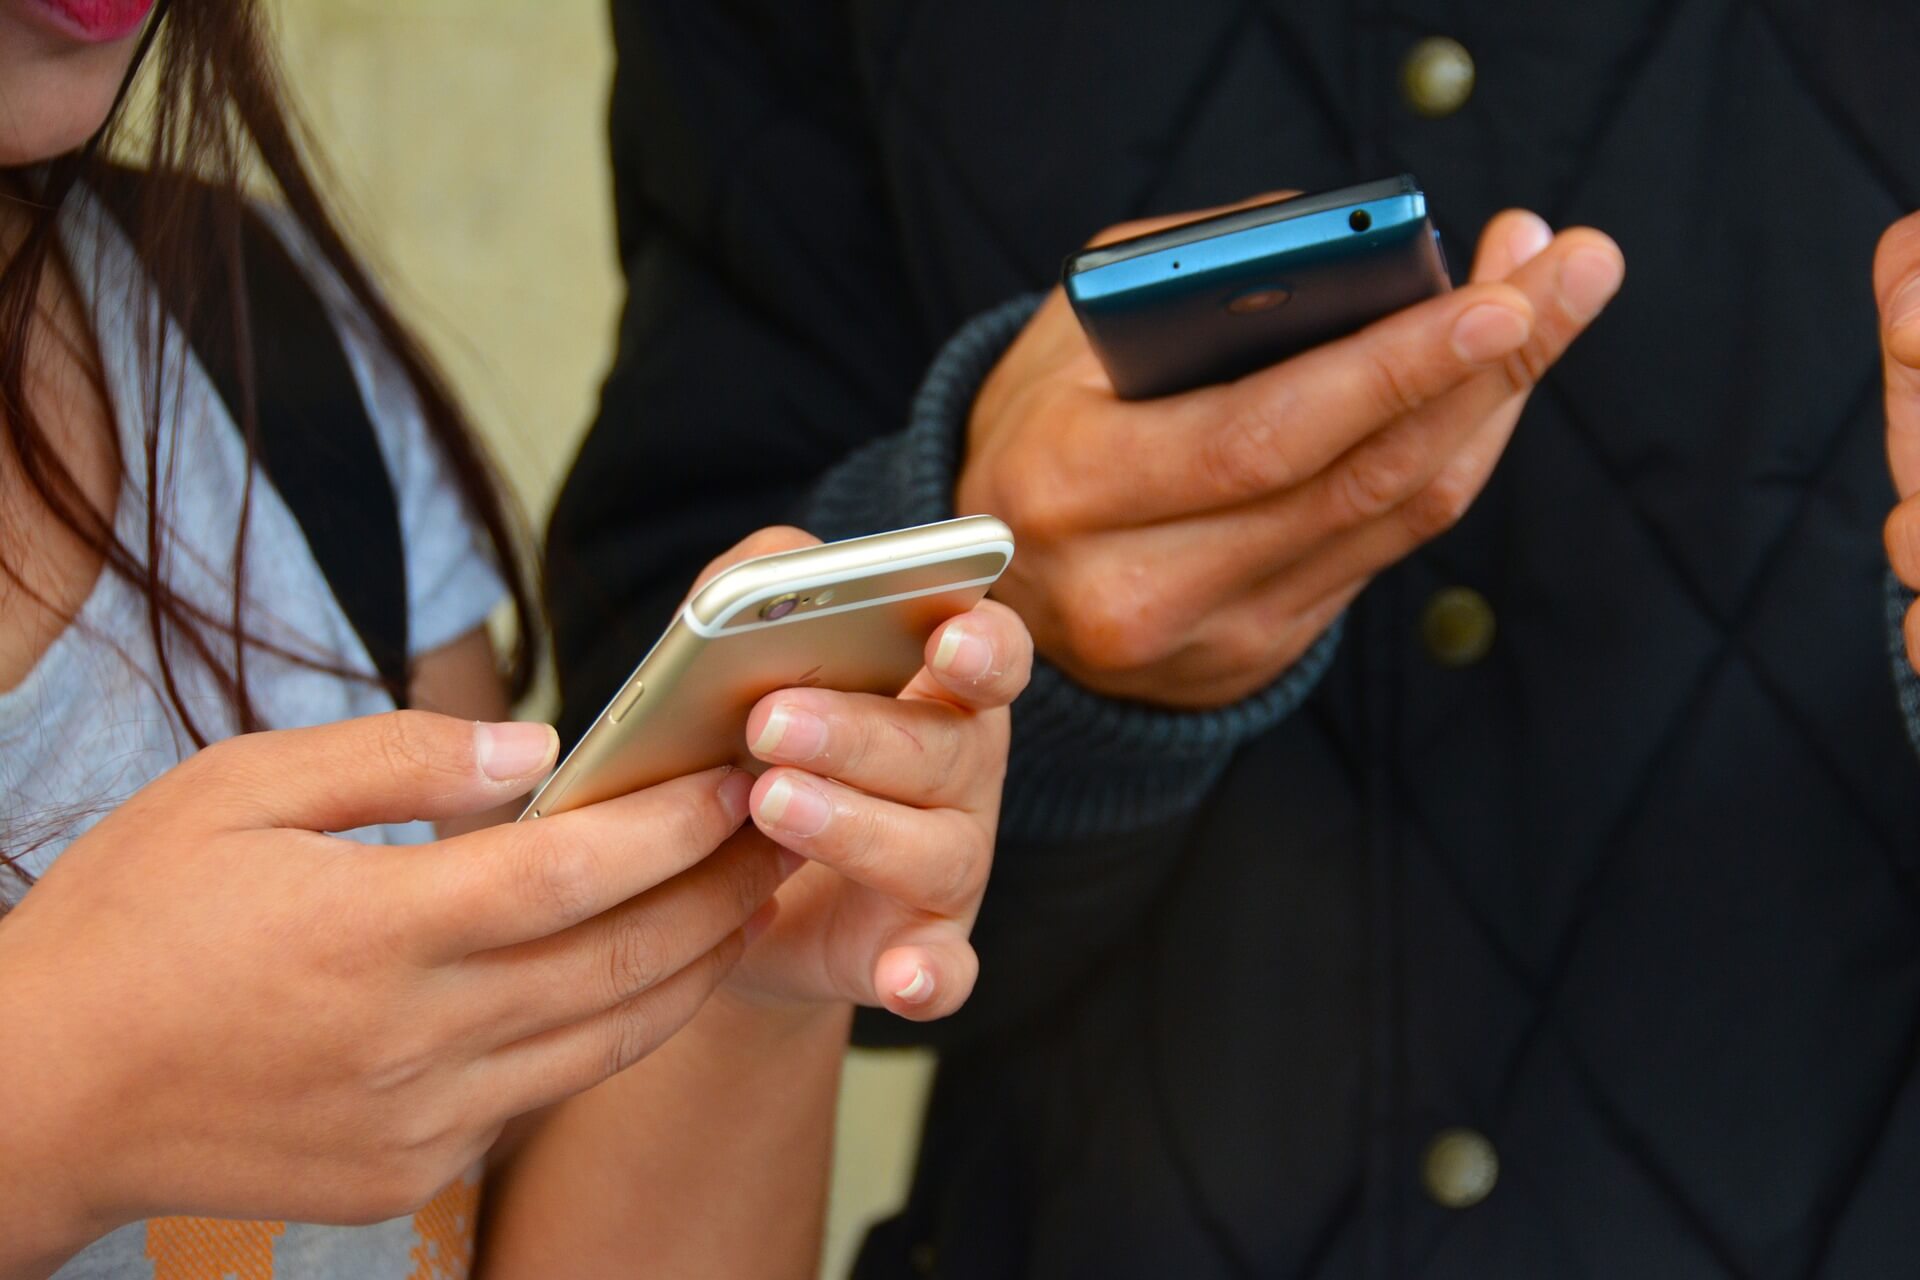 Two people stand next to each other with their smartphones in their hands. One of them, a young woman, holds hers with both hands, while the other, a man, holds his with one.